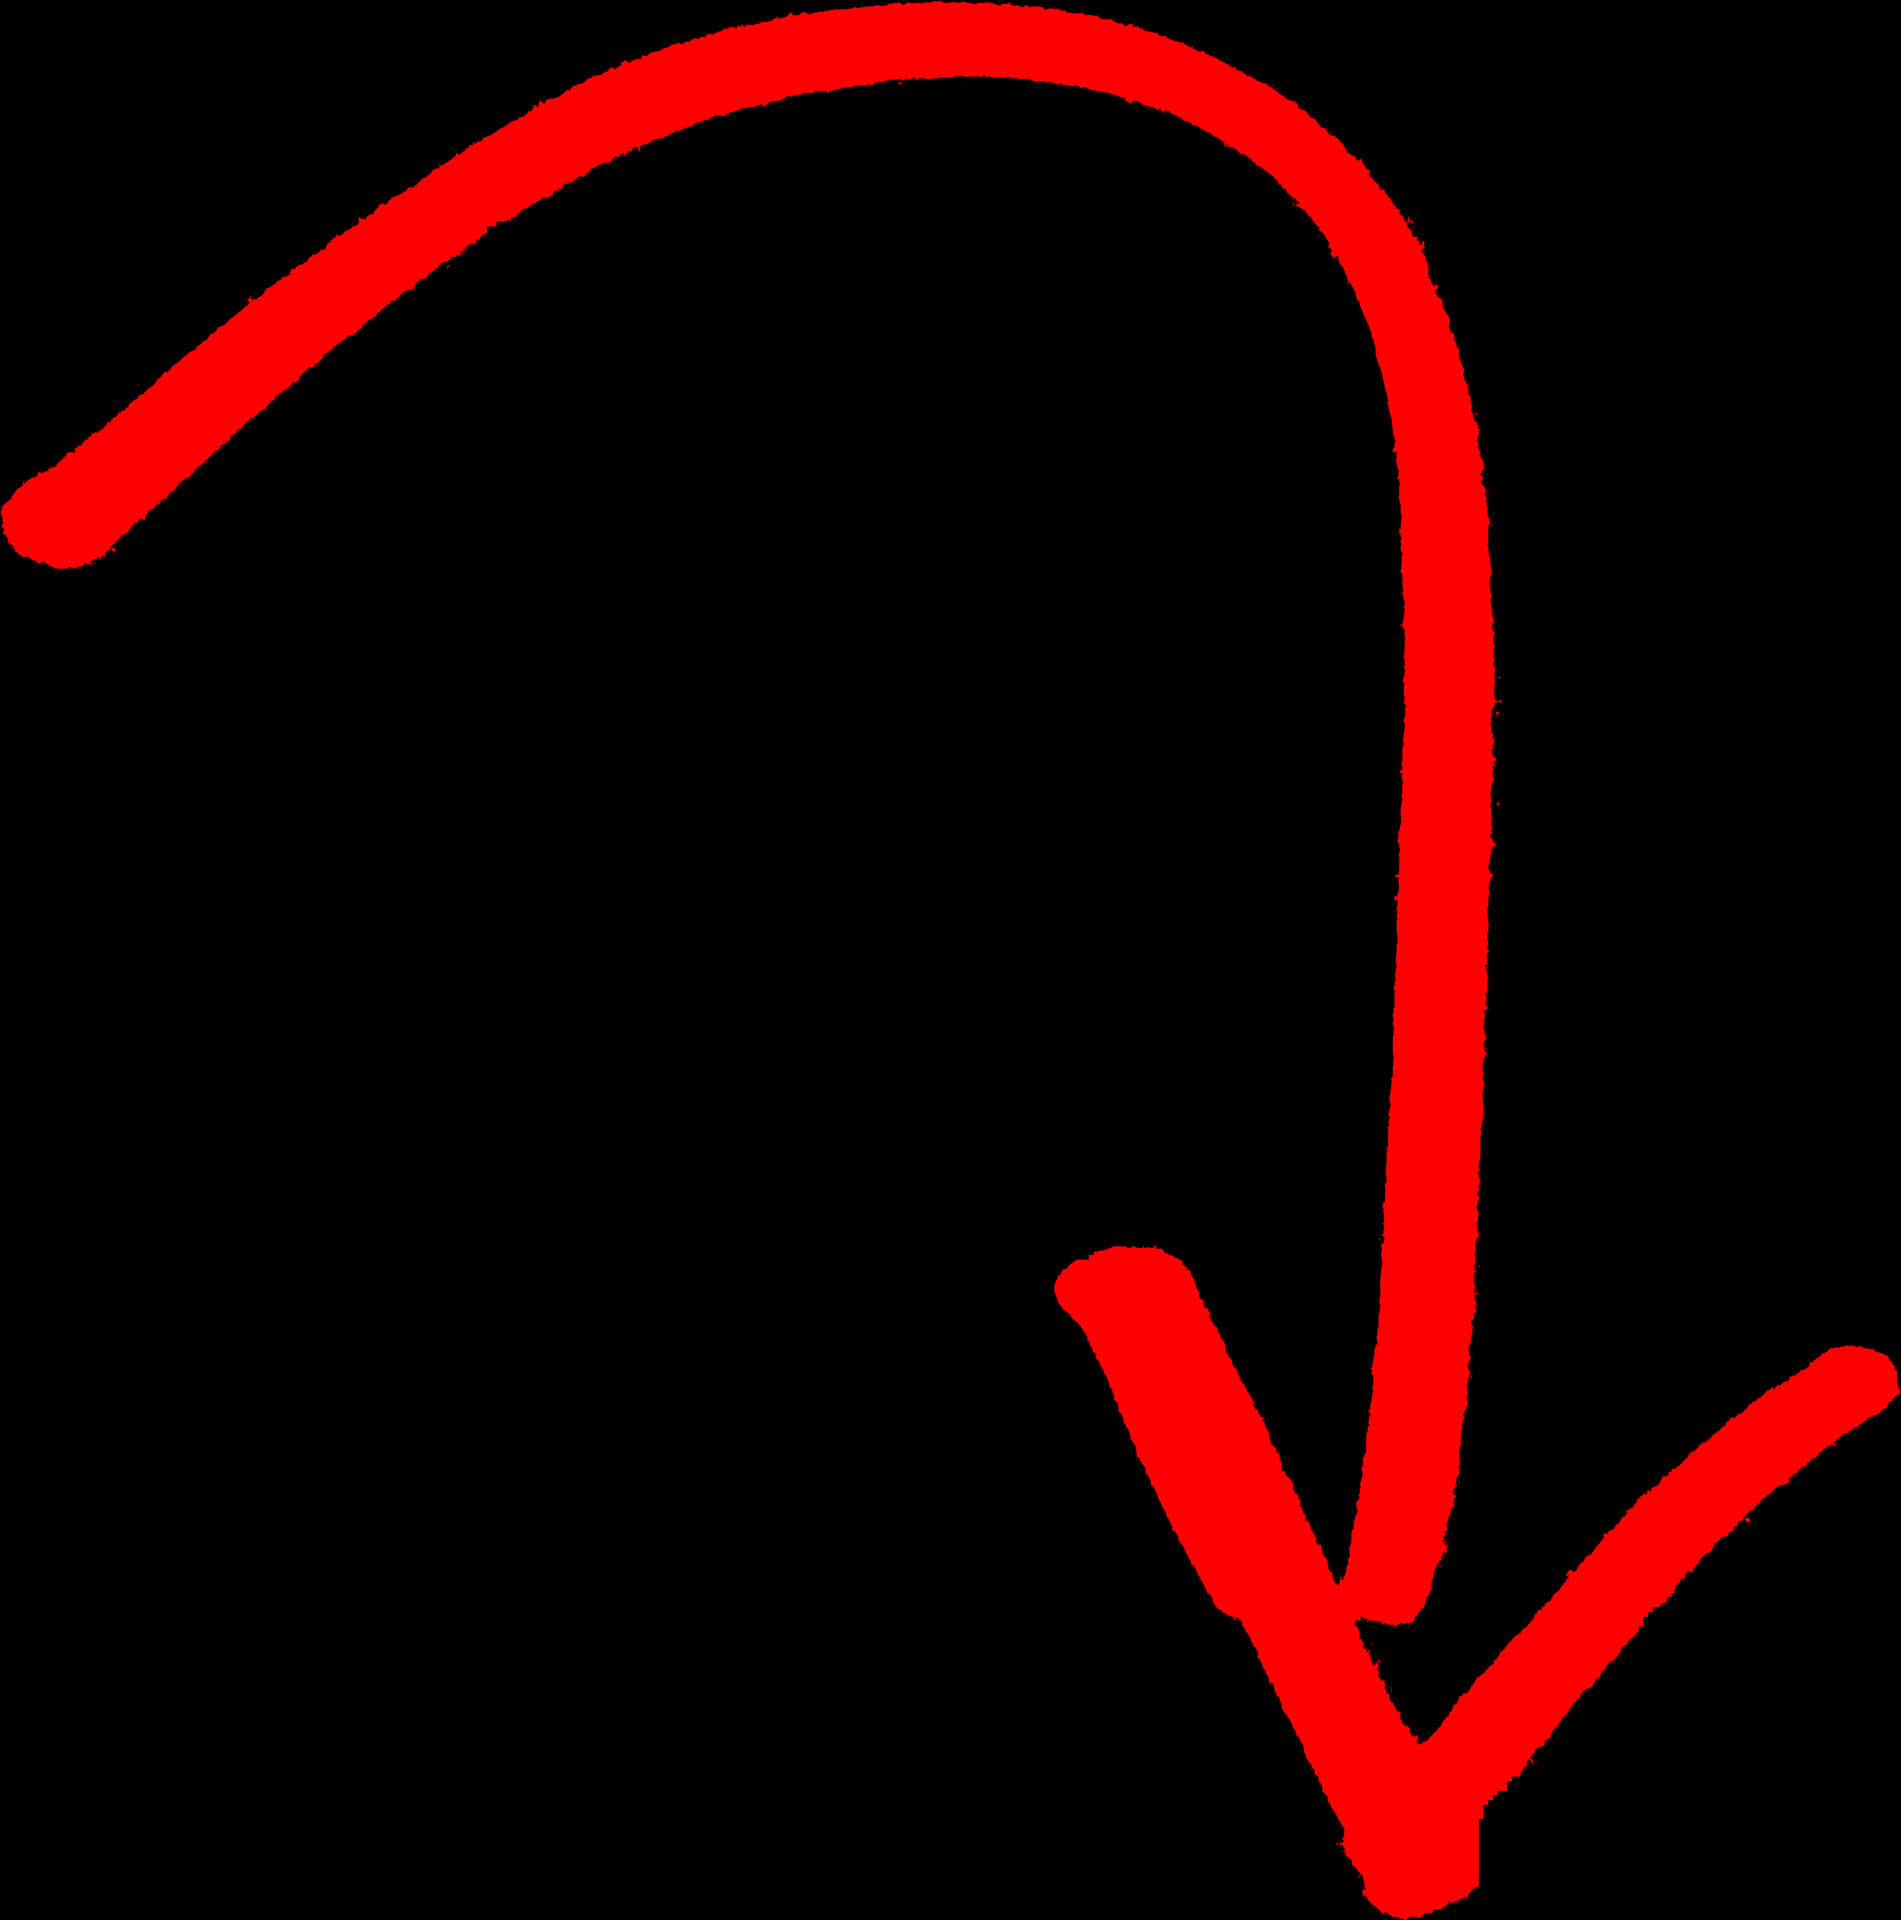 Red Arrow Curving Downward PNG